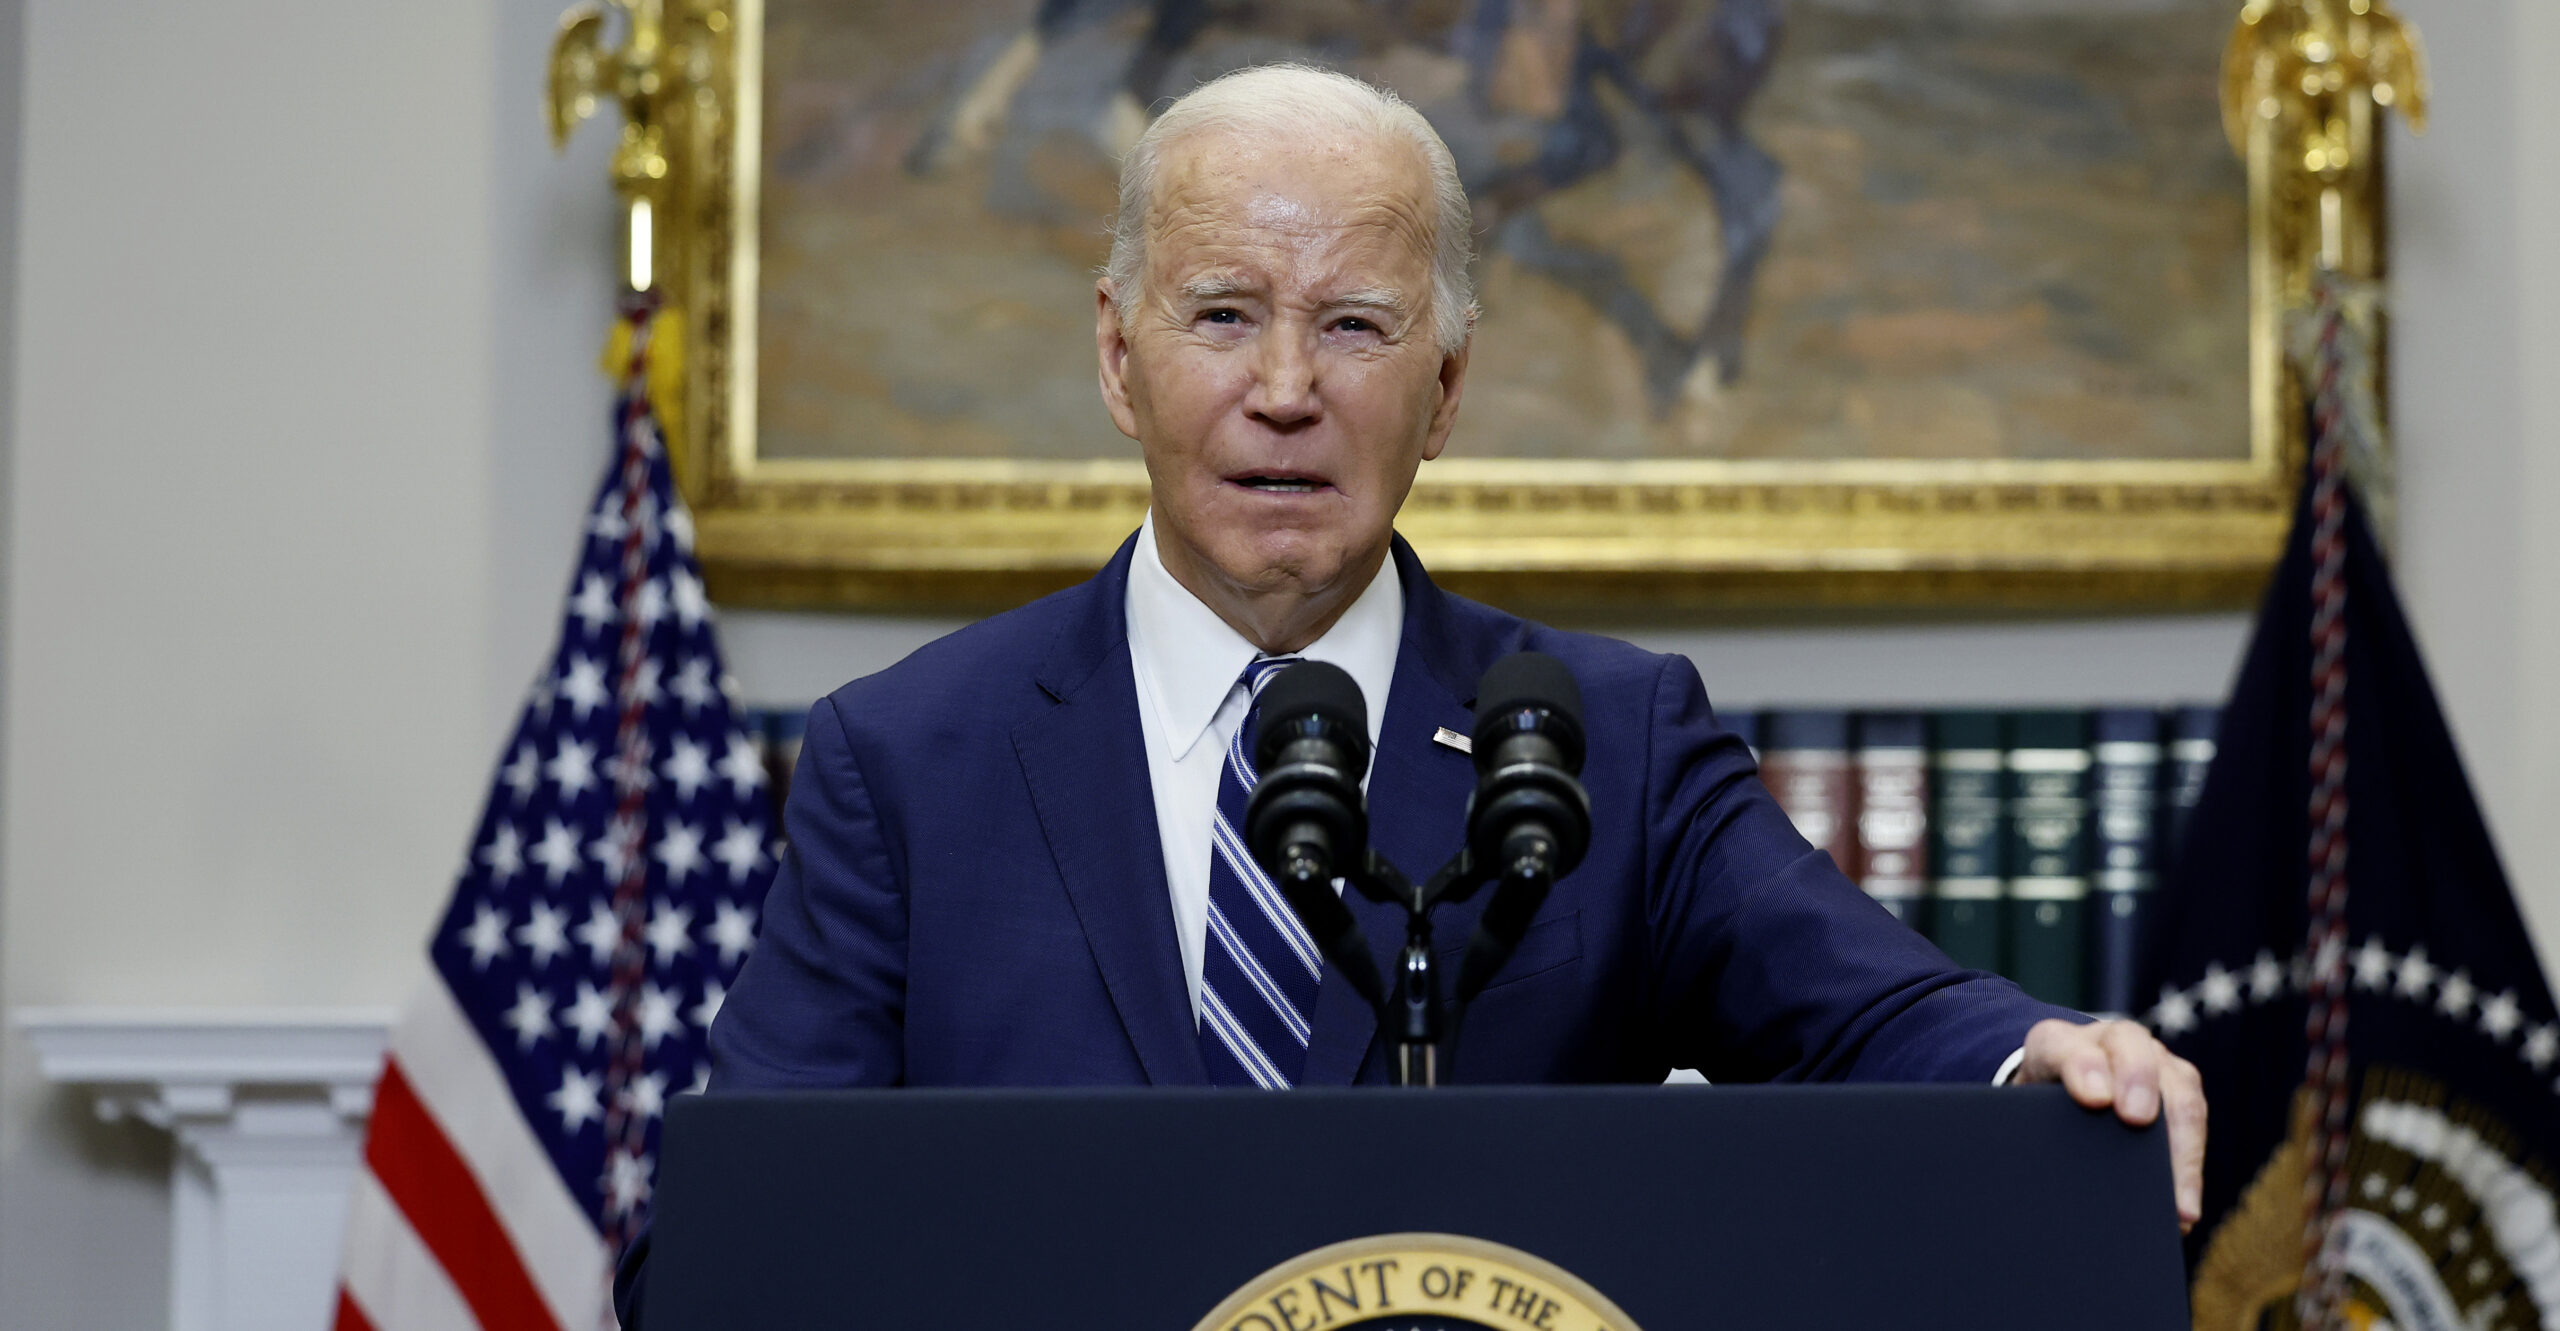 EXCLUSIVE: Biden Rule Would Deprive Pregnancy Resource Centers of Funds and Favor Abortion Groups, Conservatives Warn